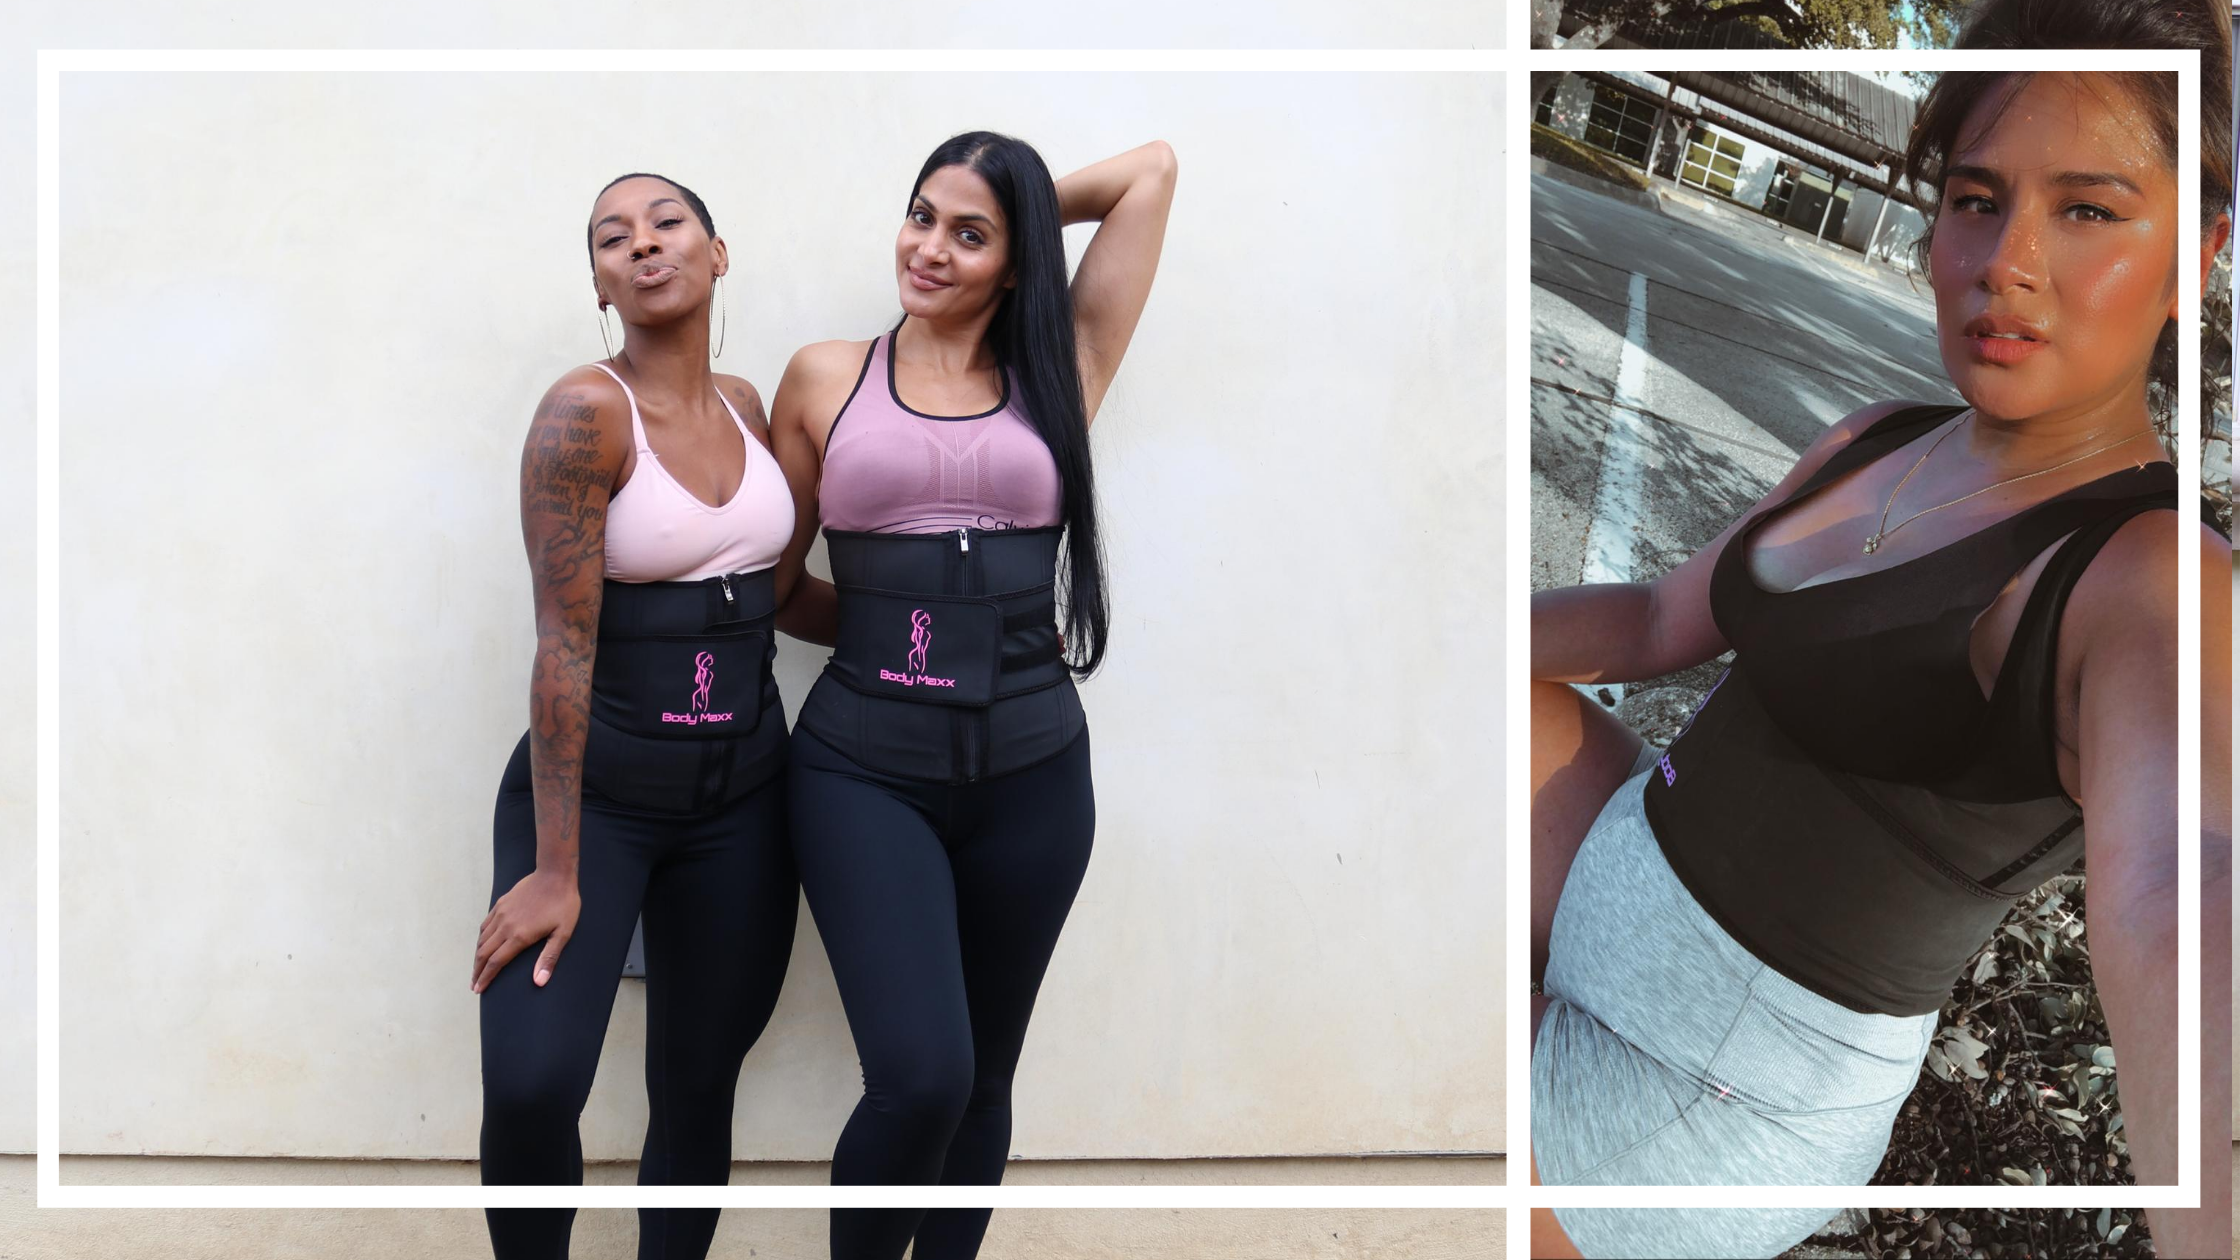 How Waist Trainers Became The Biggest Thing On Instagram